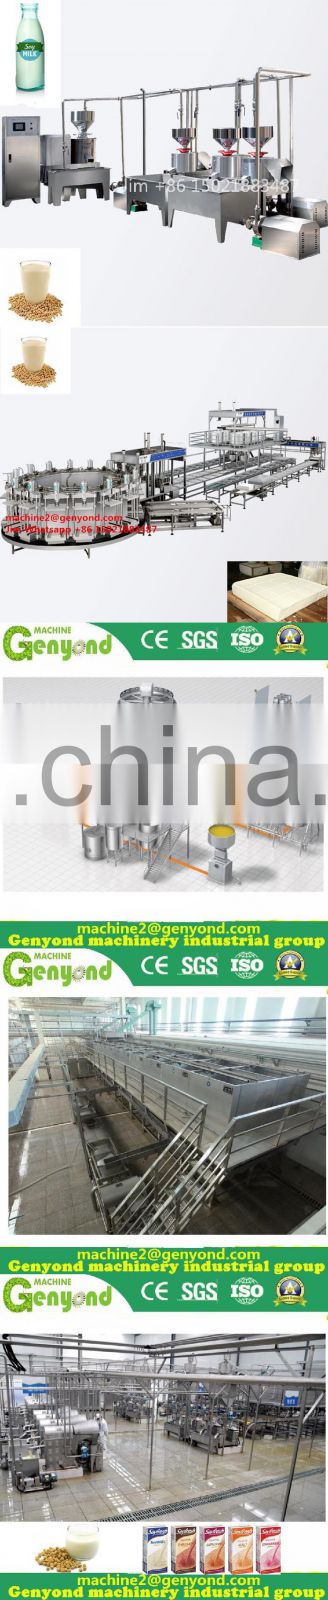 Hot new products soy sauce making machine best price